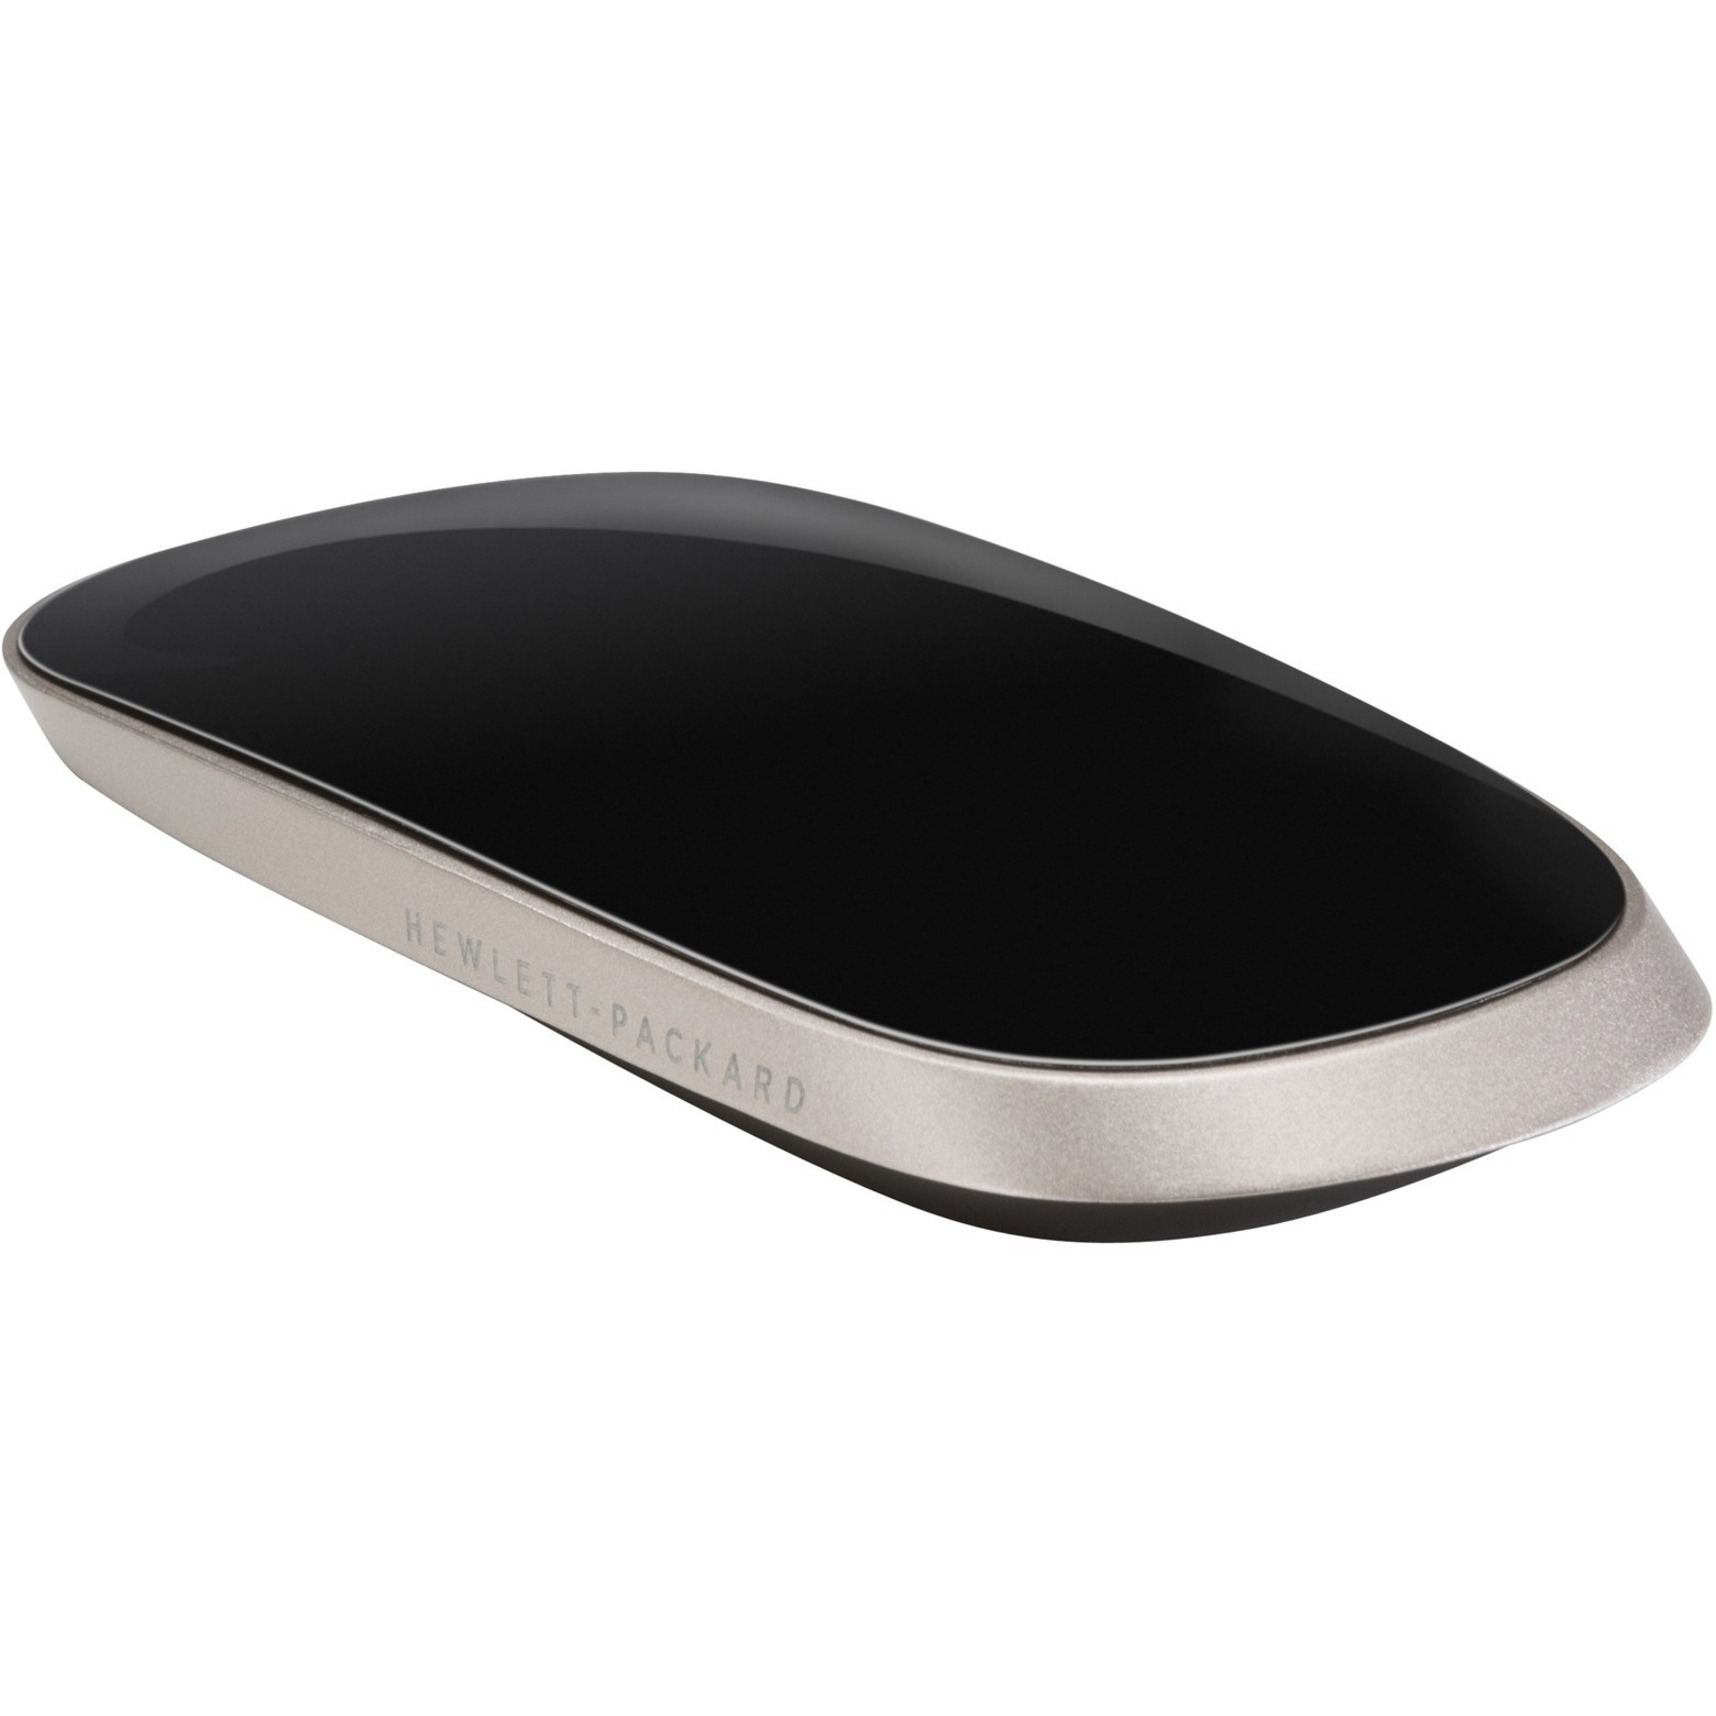 HP Z8000 Bluetooth Mouse - image 1 of 6